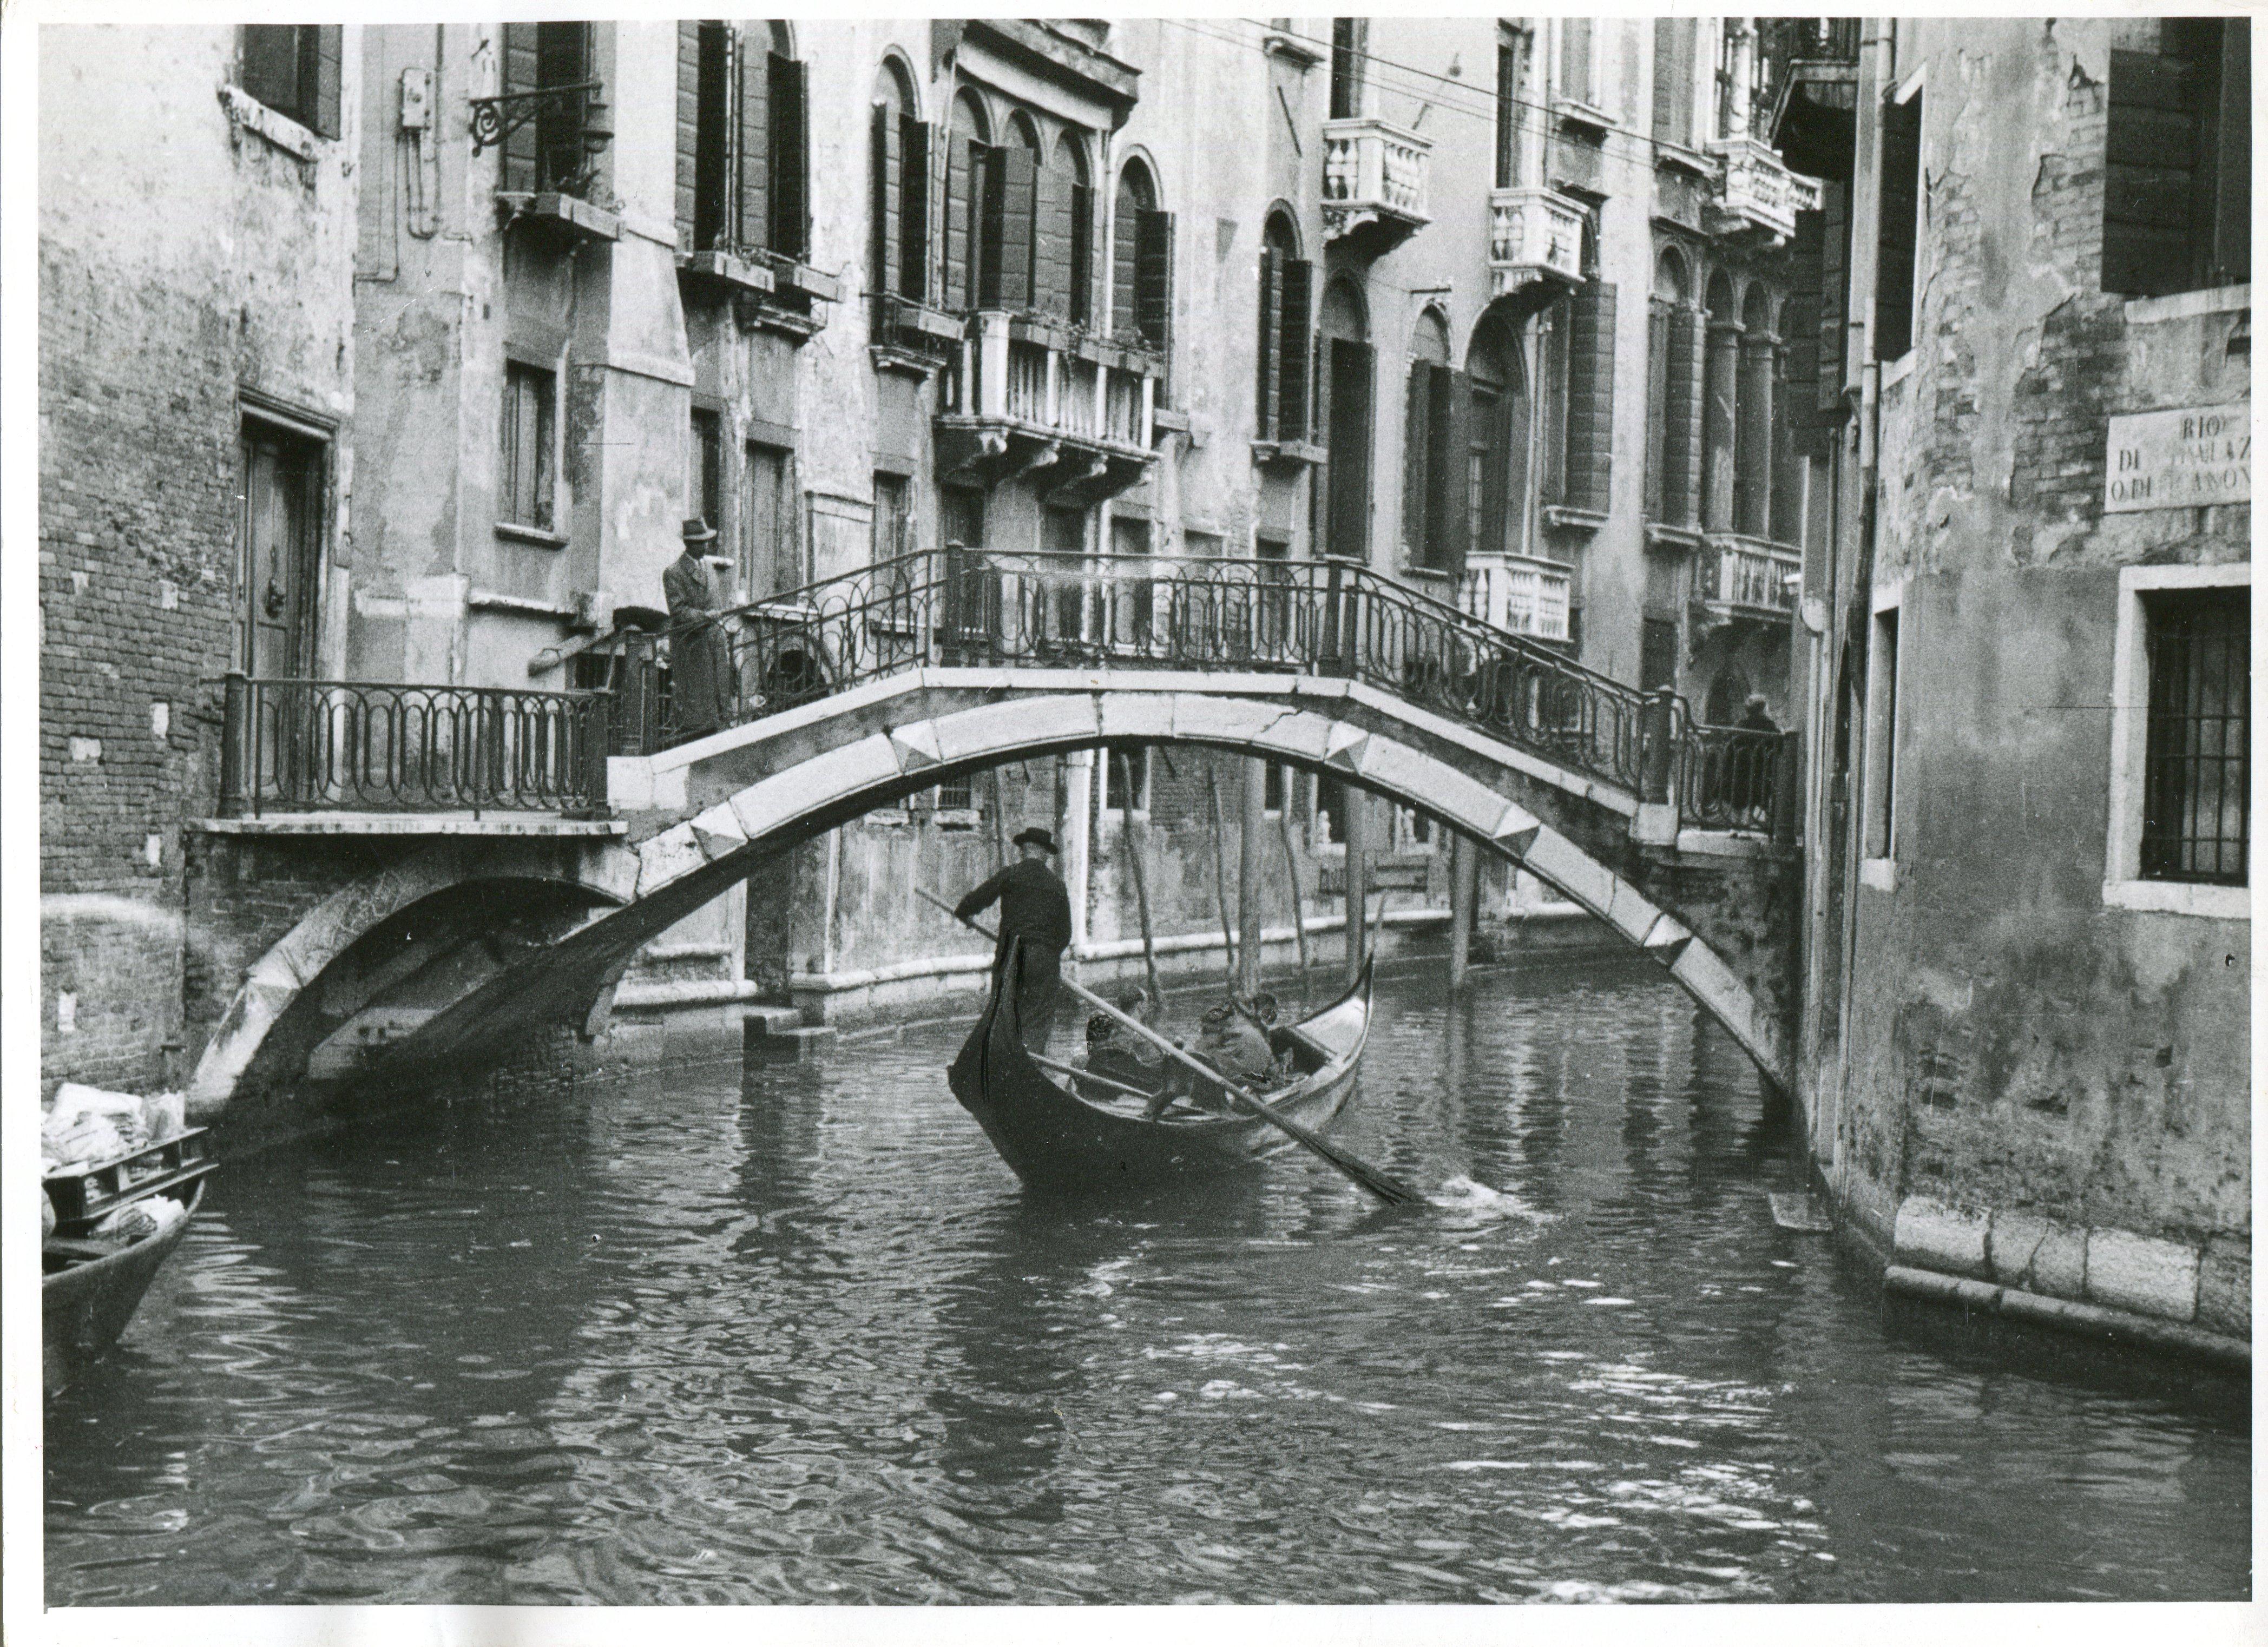 Erich Andres Black and White Photograph - Venice, Italy, 1954